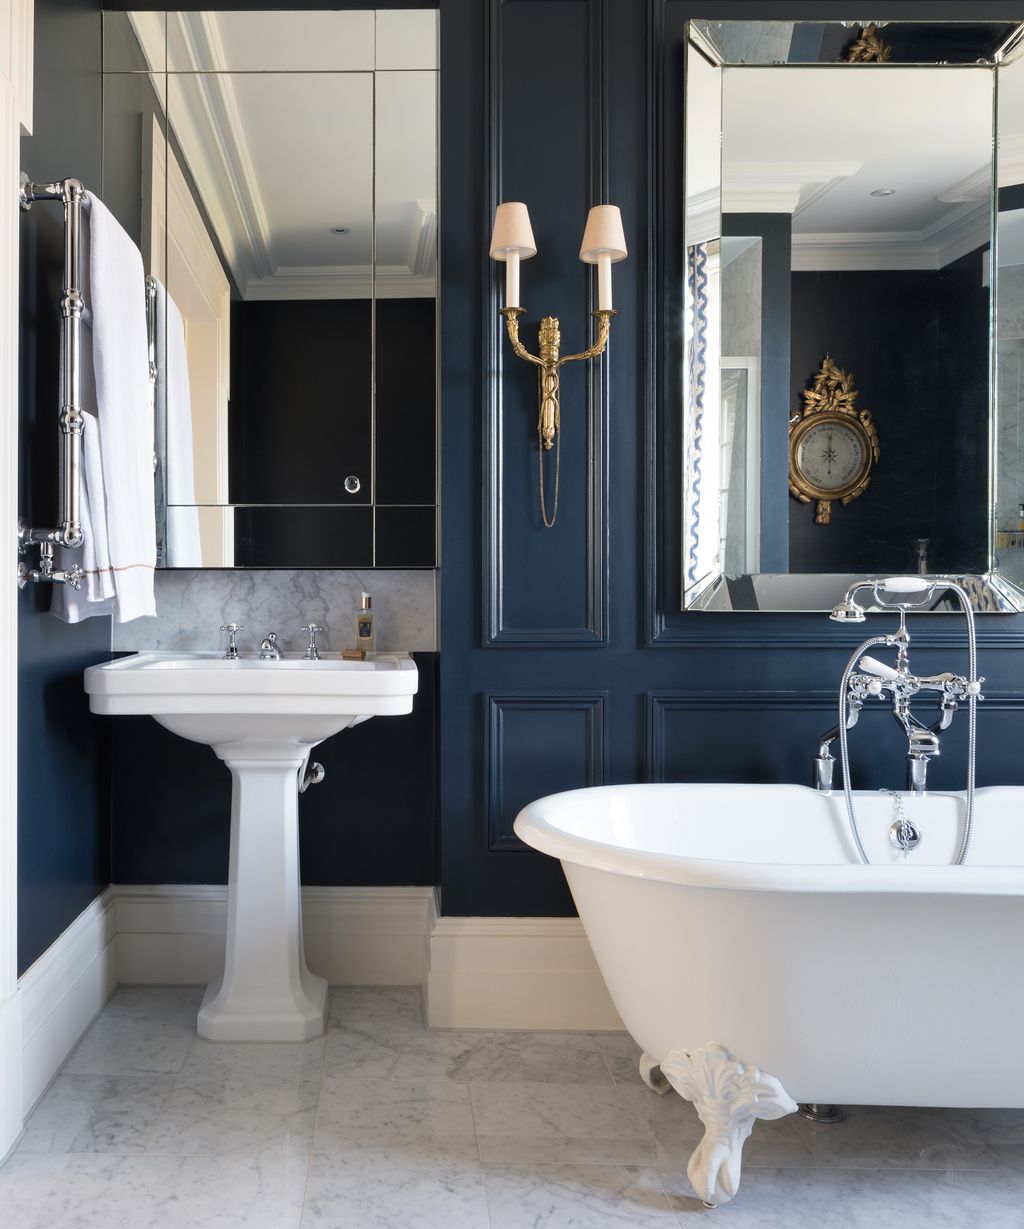 Ensuite ideas: Stylish decor and design ideas for ensuites of all sizes